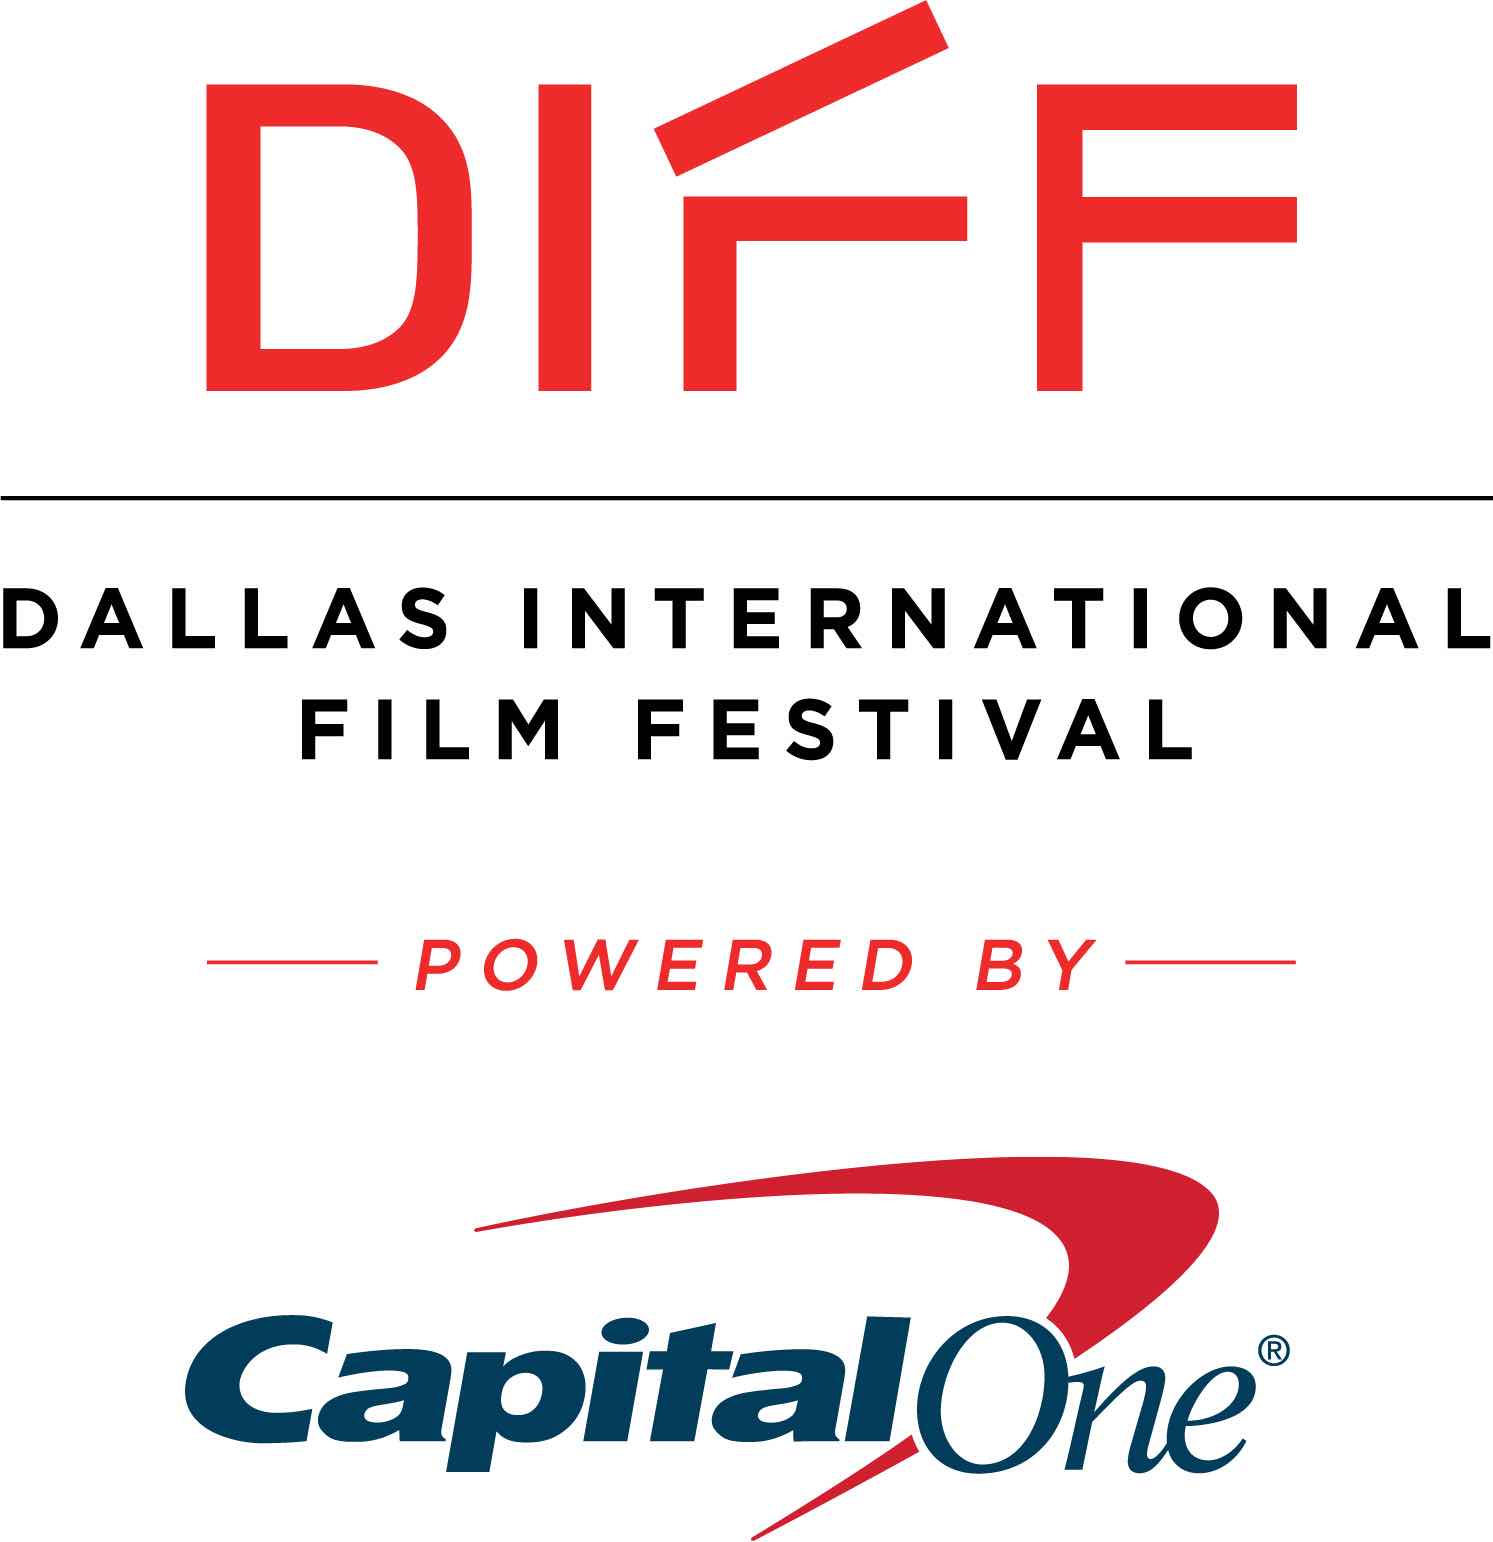 The Dallas International Film Festival (DIFF) is committed to providing leadership in screen education. Here's why you should get involved.